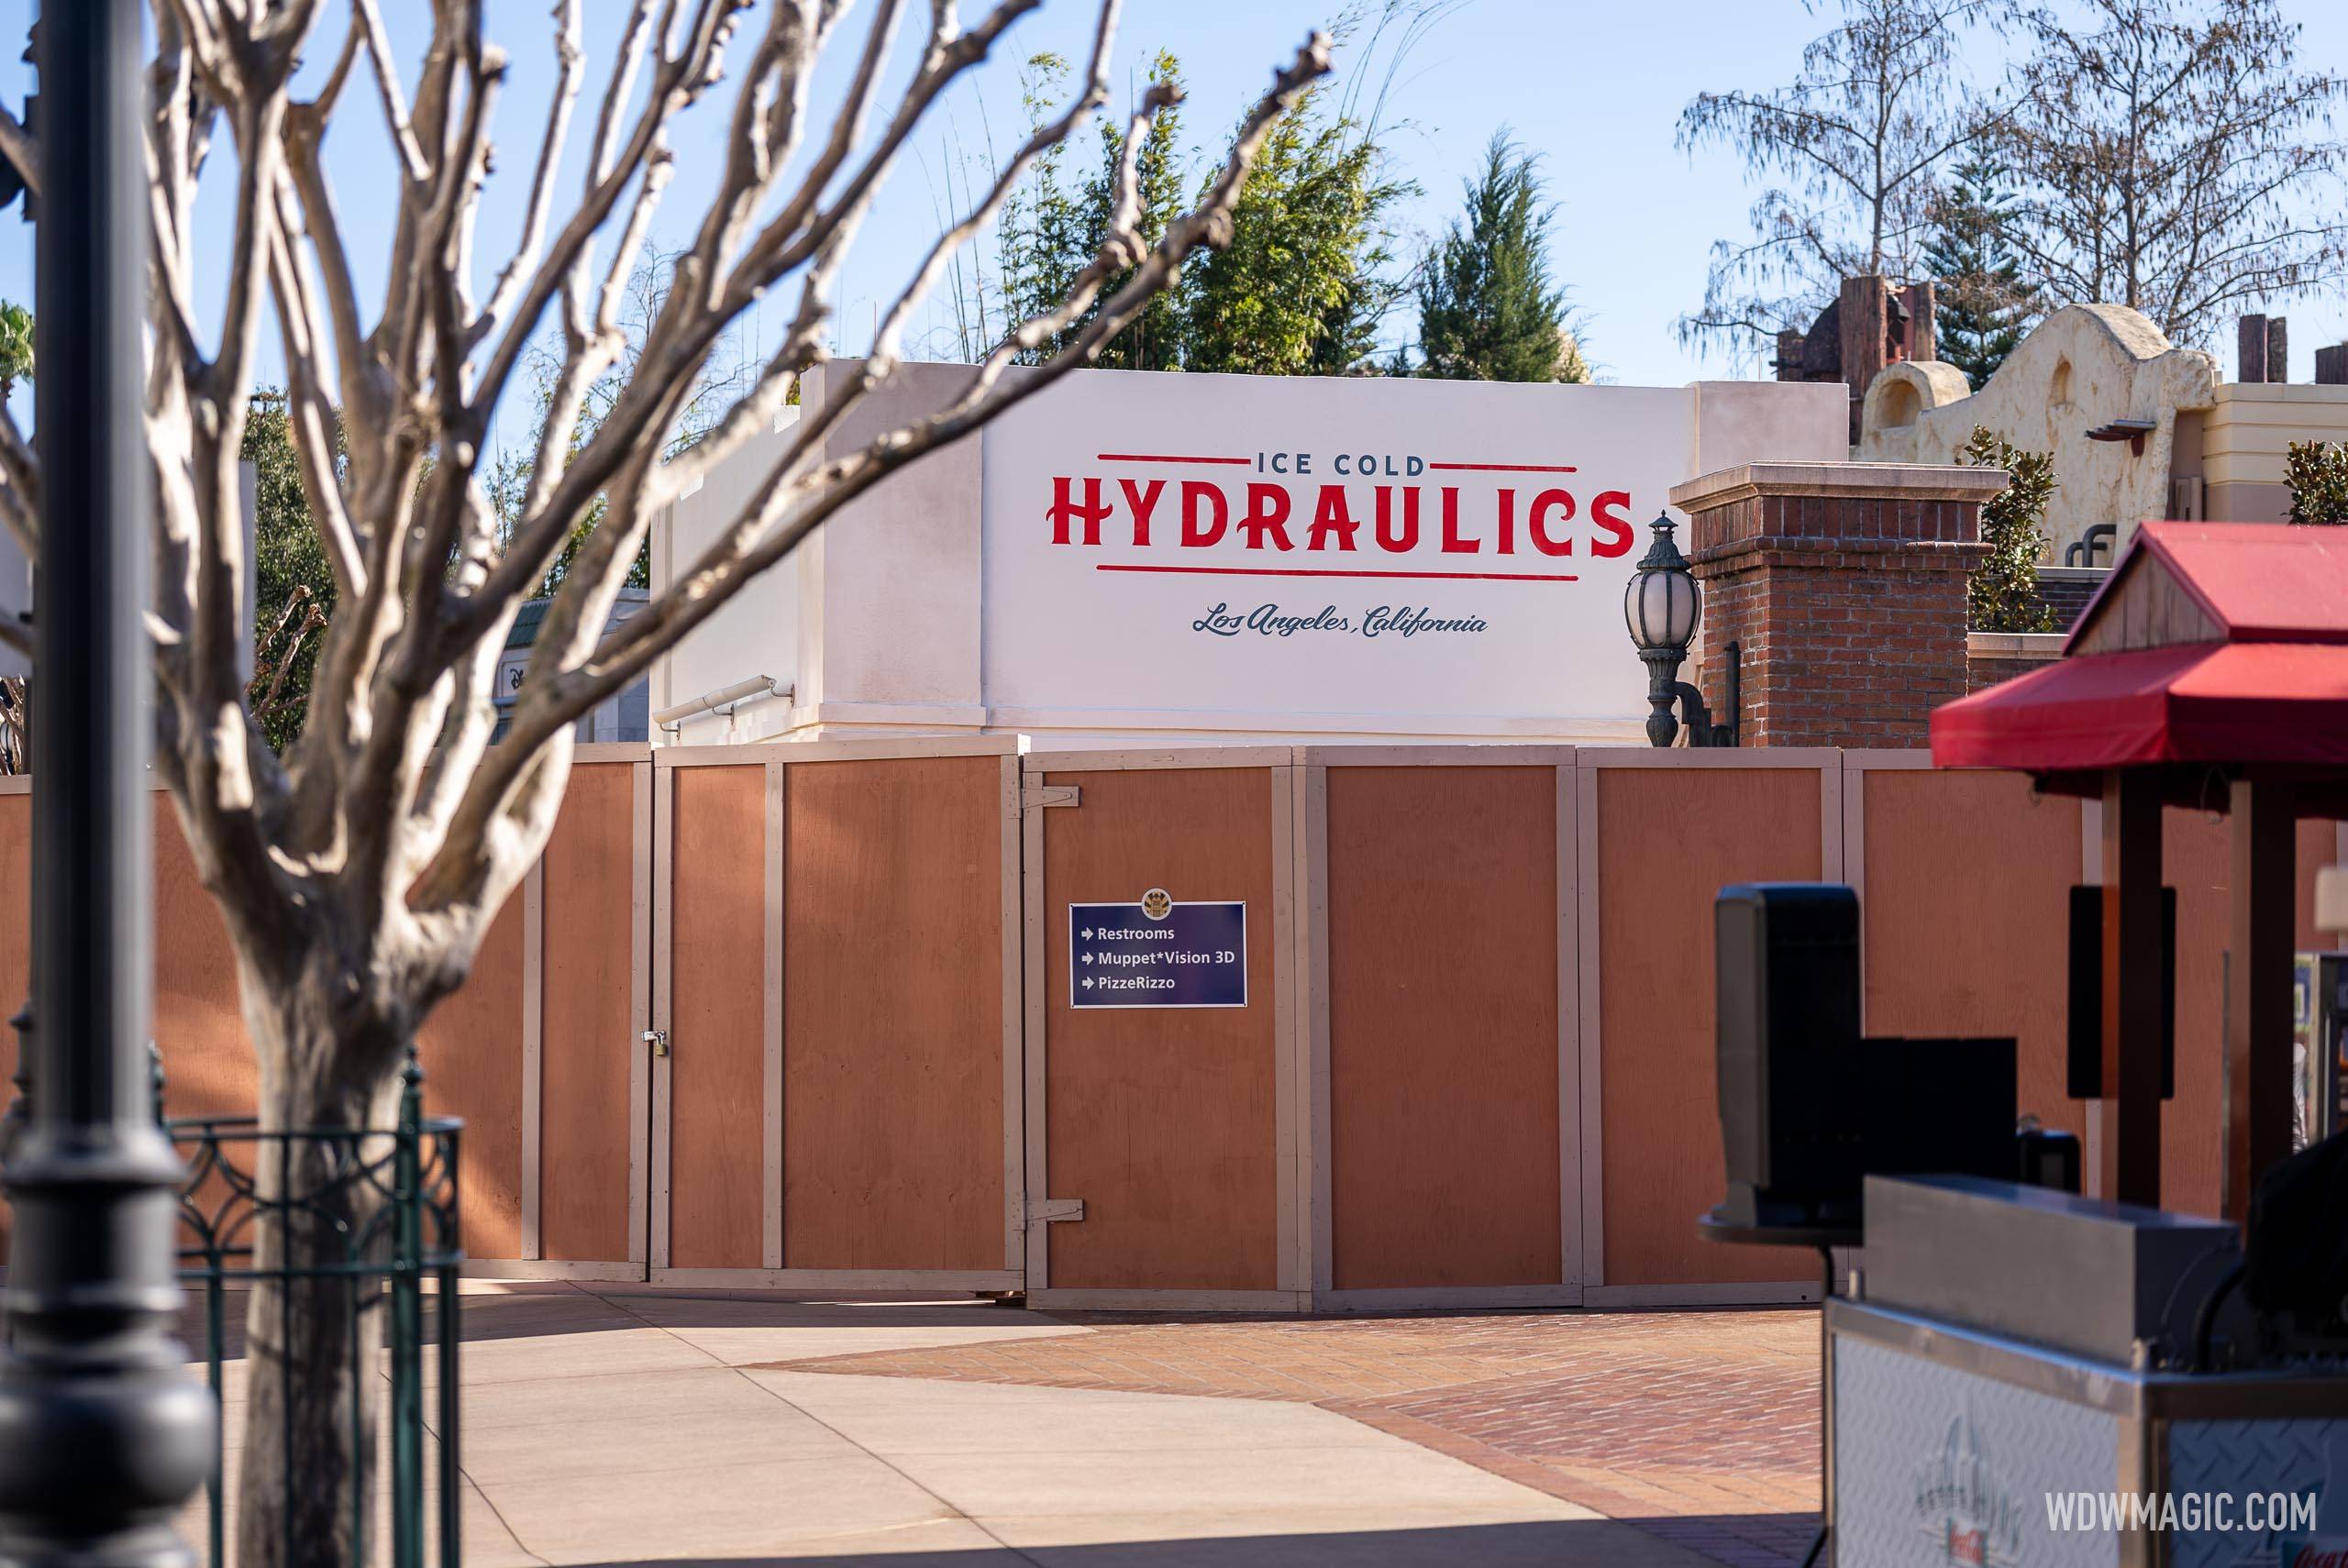 New Coca-Cola location nears opening at Disney's Hollywood Studios